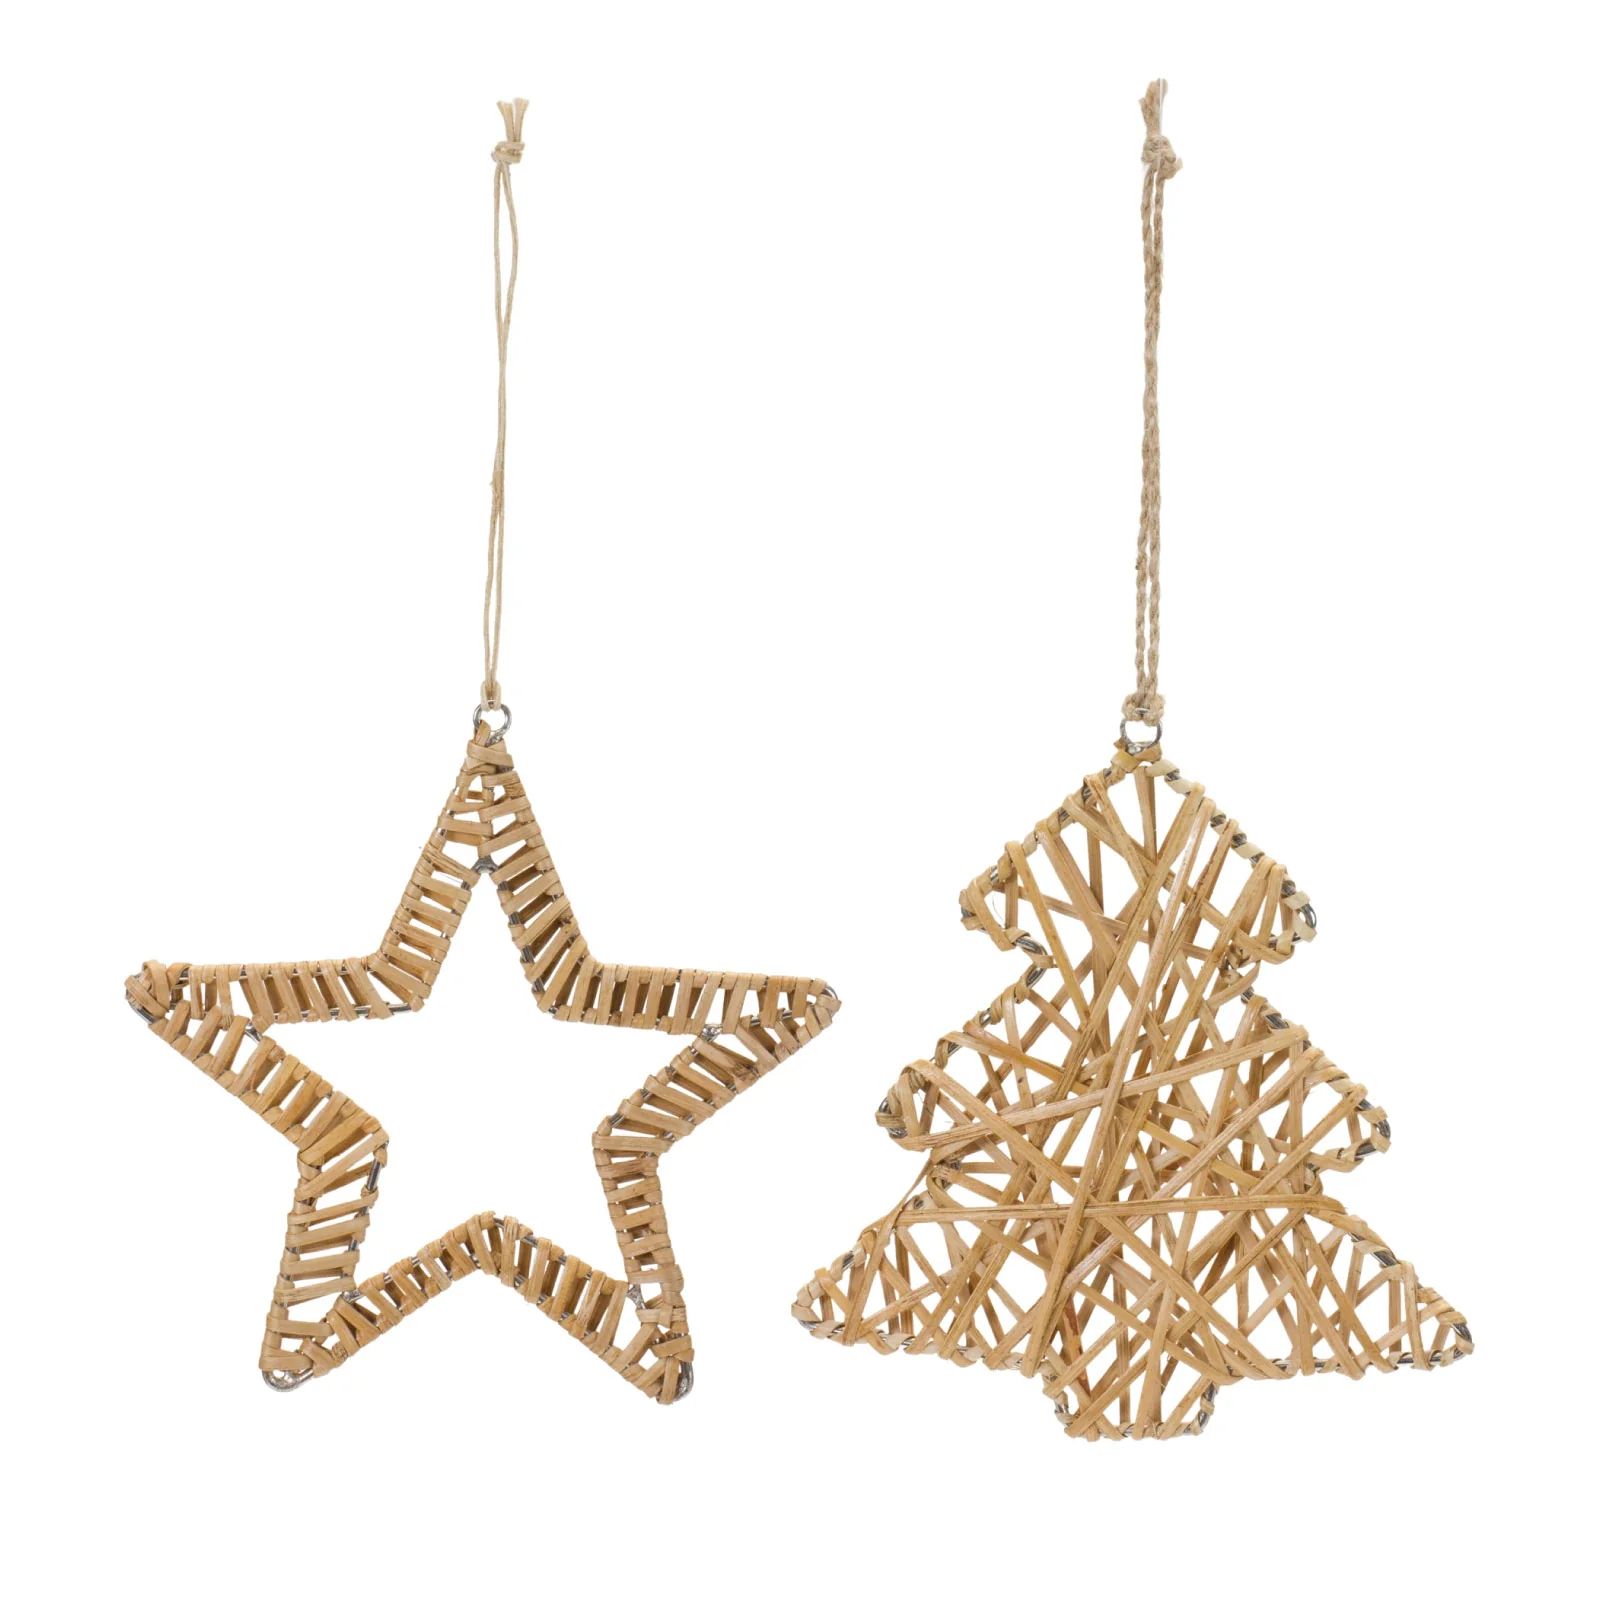 Rattan Star and Tree Ornament Set | Brooke and Lou